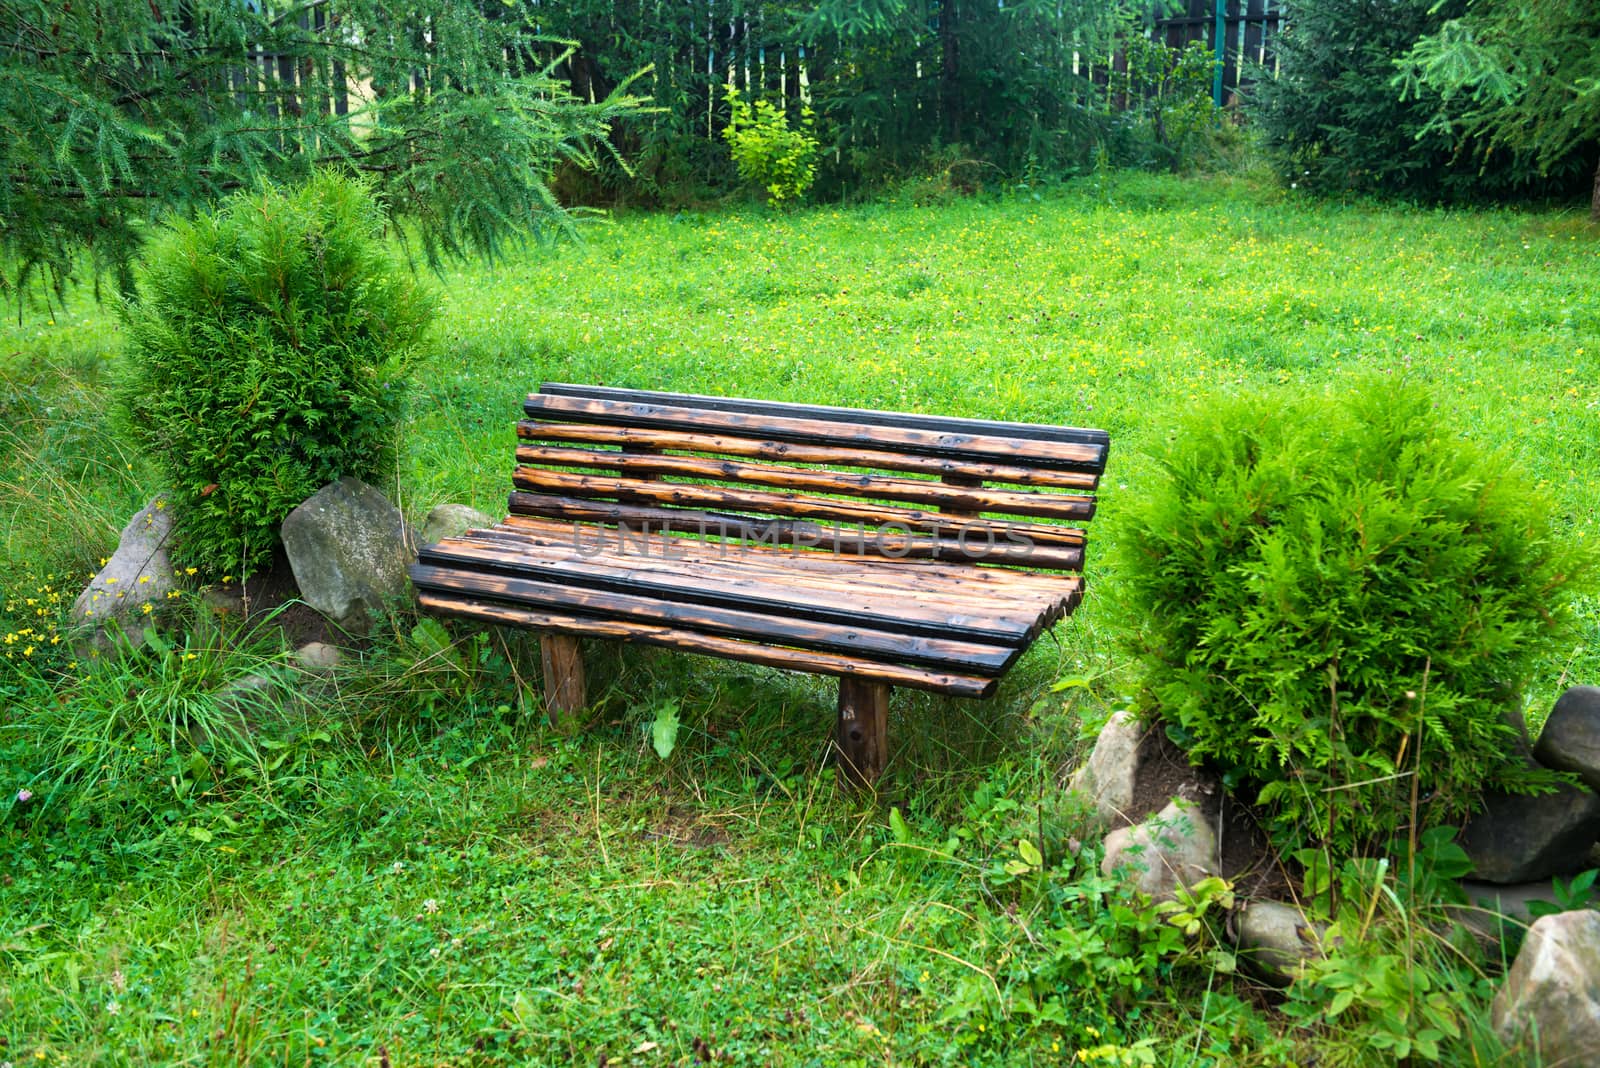 Wooden bench in the green park. Lawn with green grass